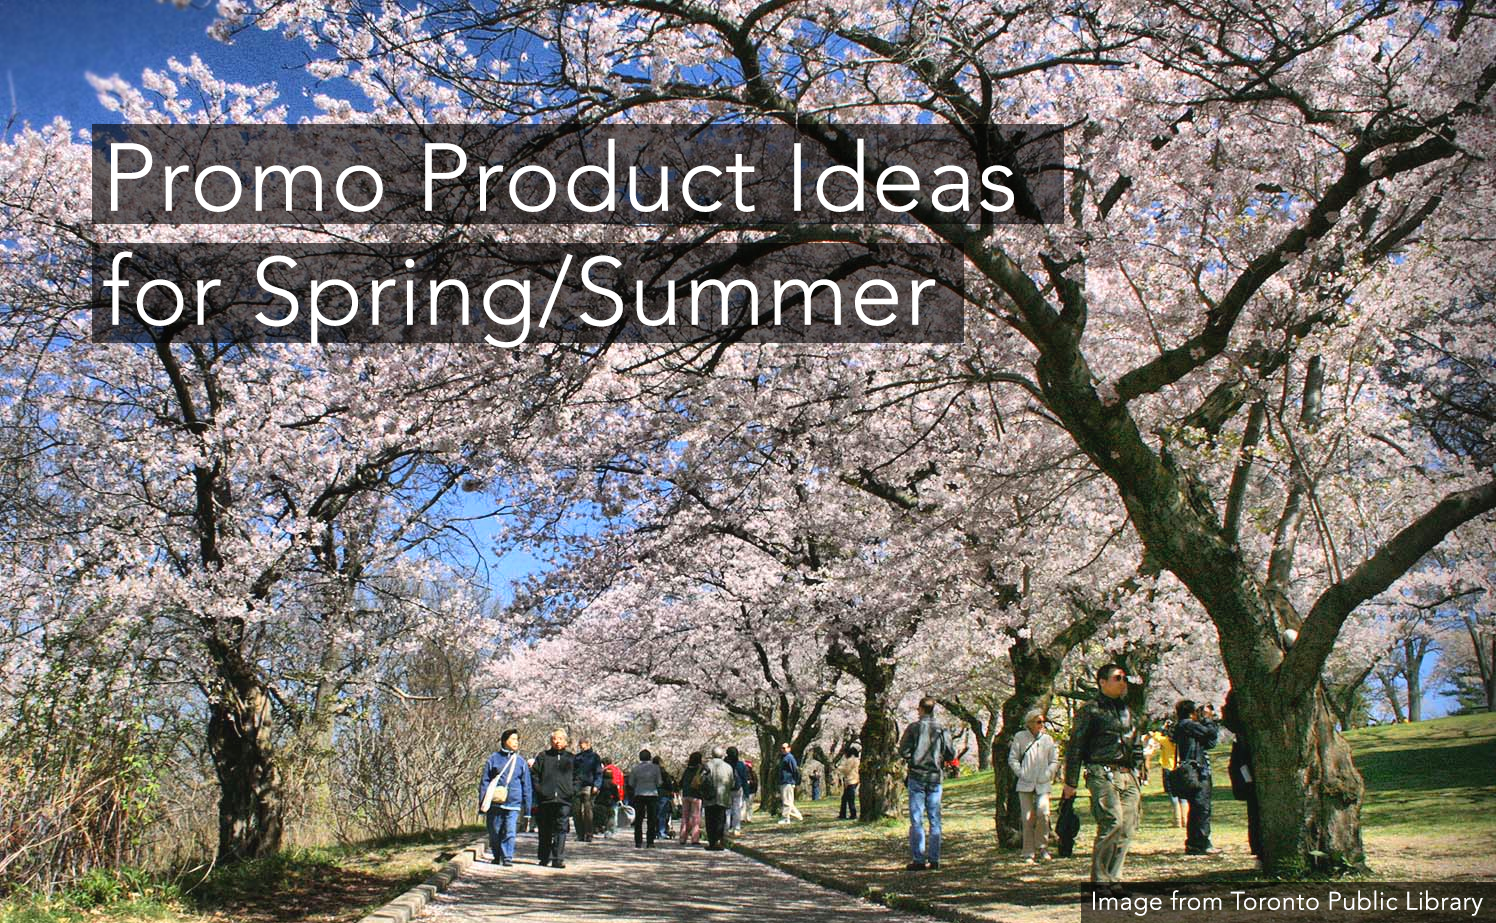 Promo Product Ideas for Spring/Summer in Toronto!